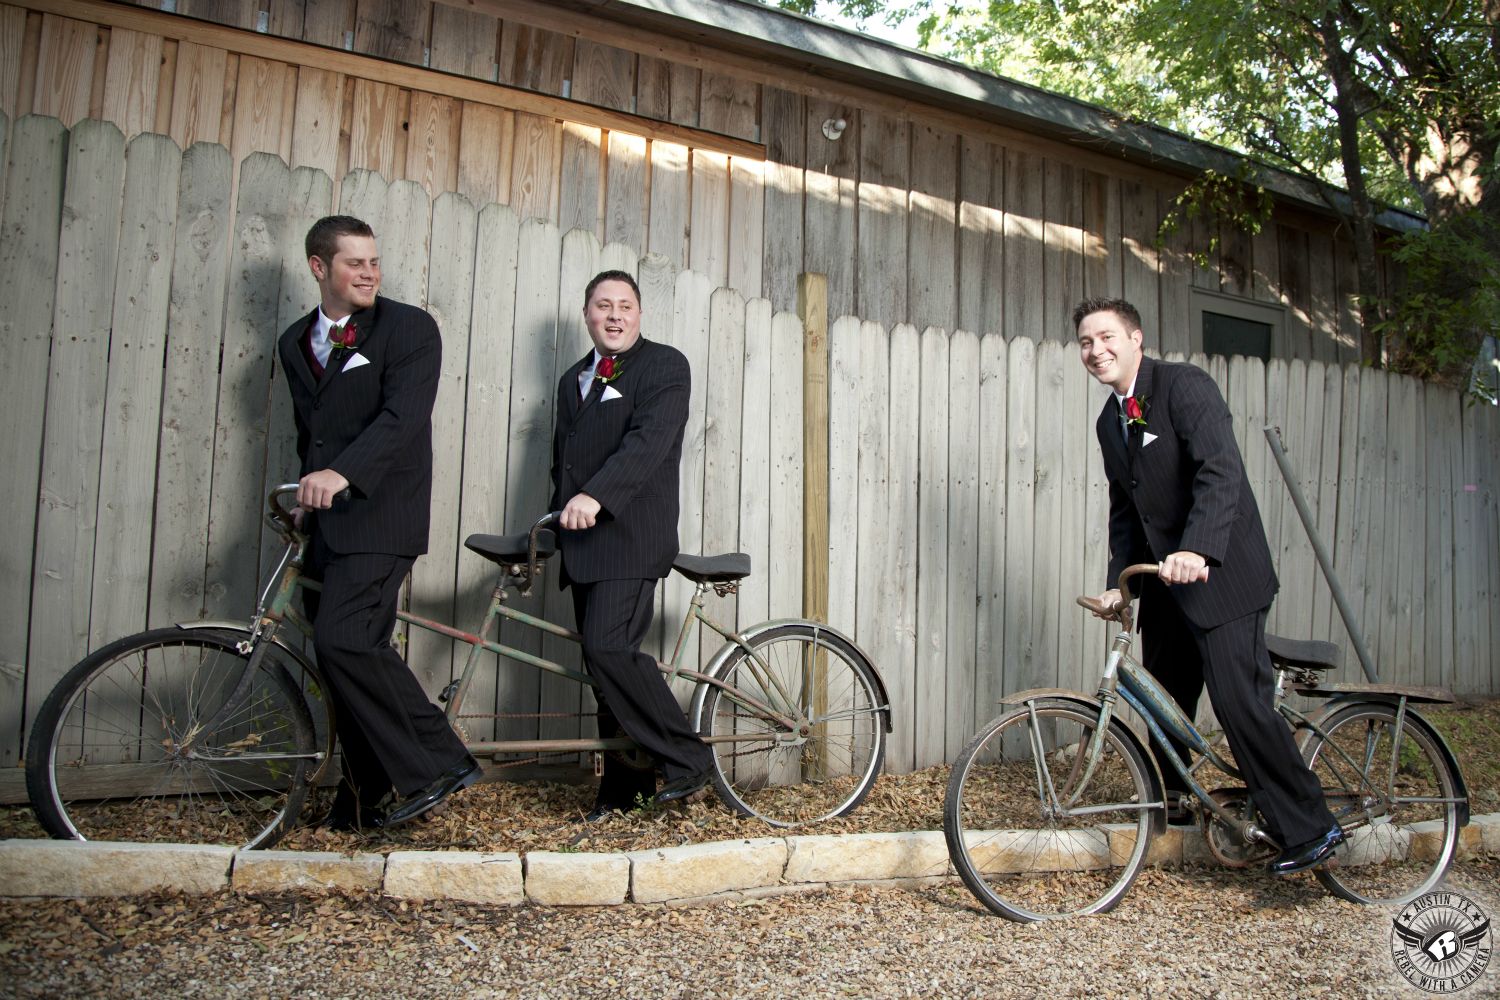 Austin wedding photogrpher takes fun picture of groom and groomsmen on bicycles in fun pose and black tuxedos at the Inn at Salado wedding venue in Texas.